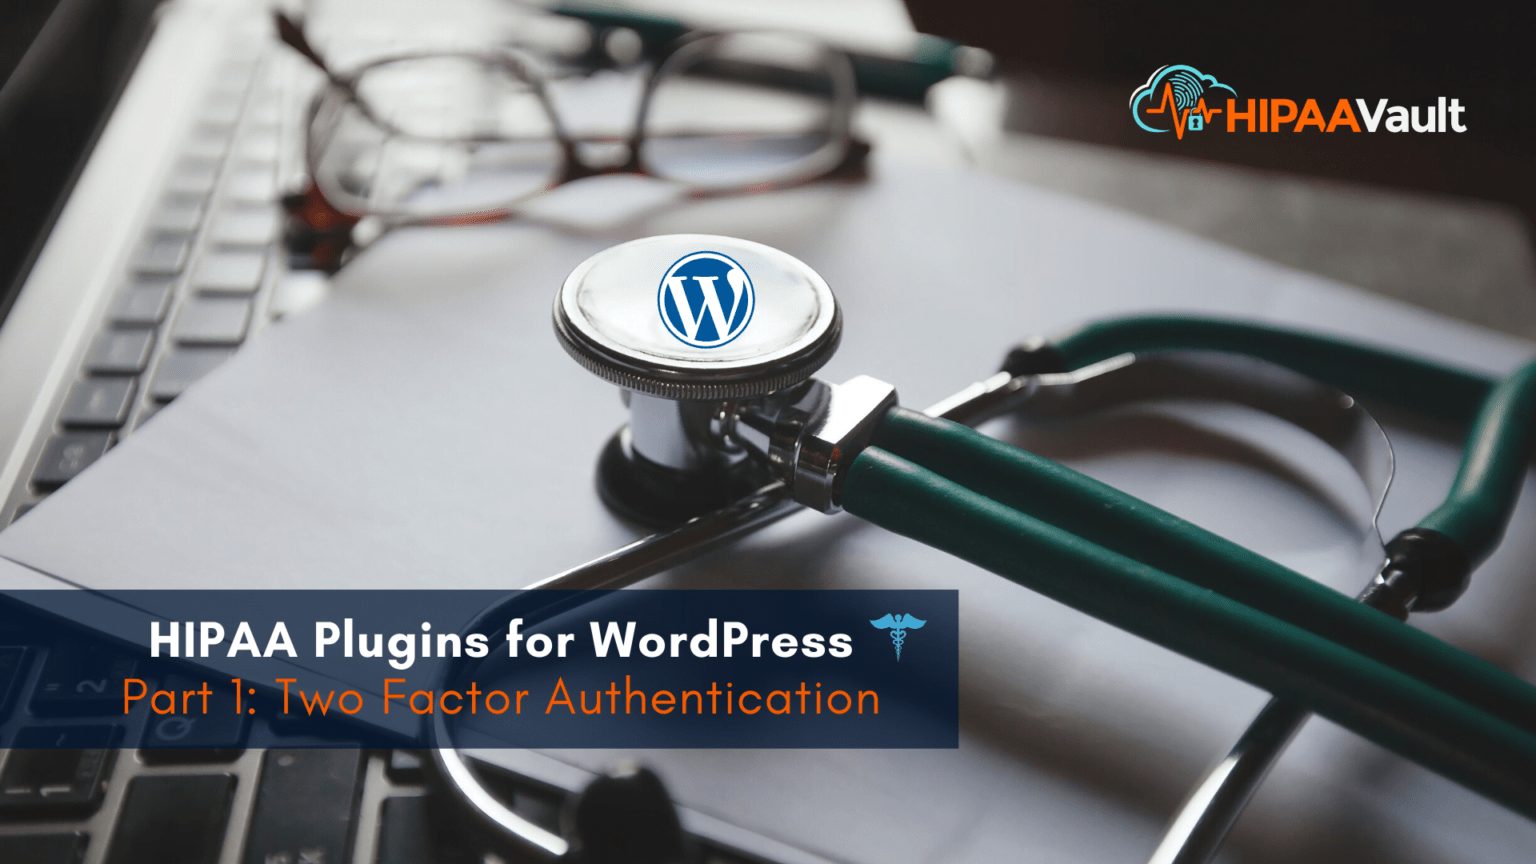 HIPAA Plugins for WordPress Part 1 Two Factor Authentication